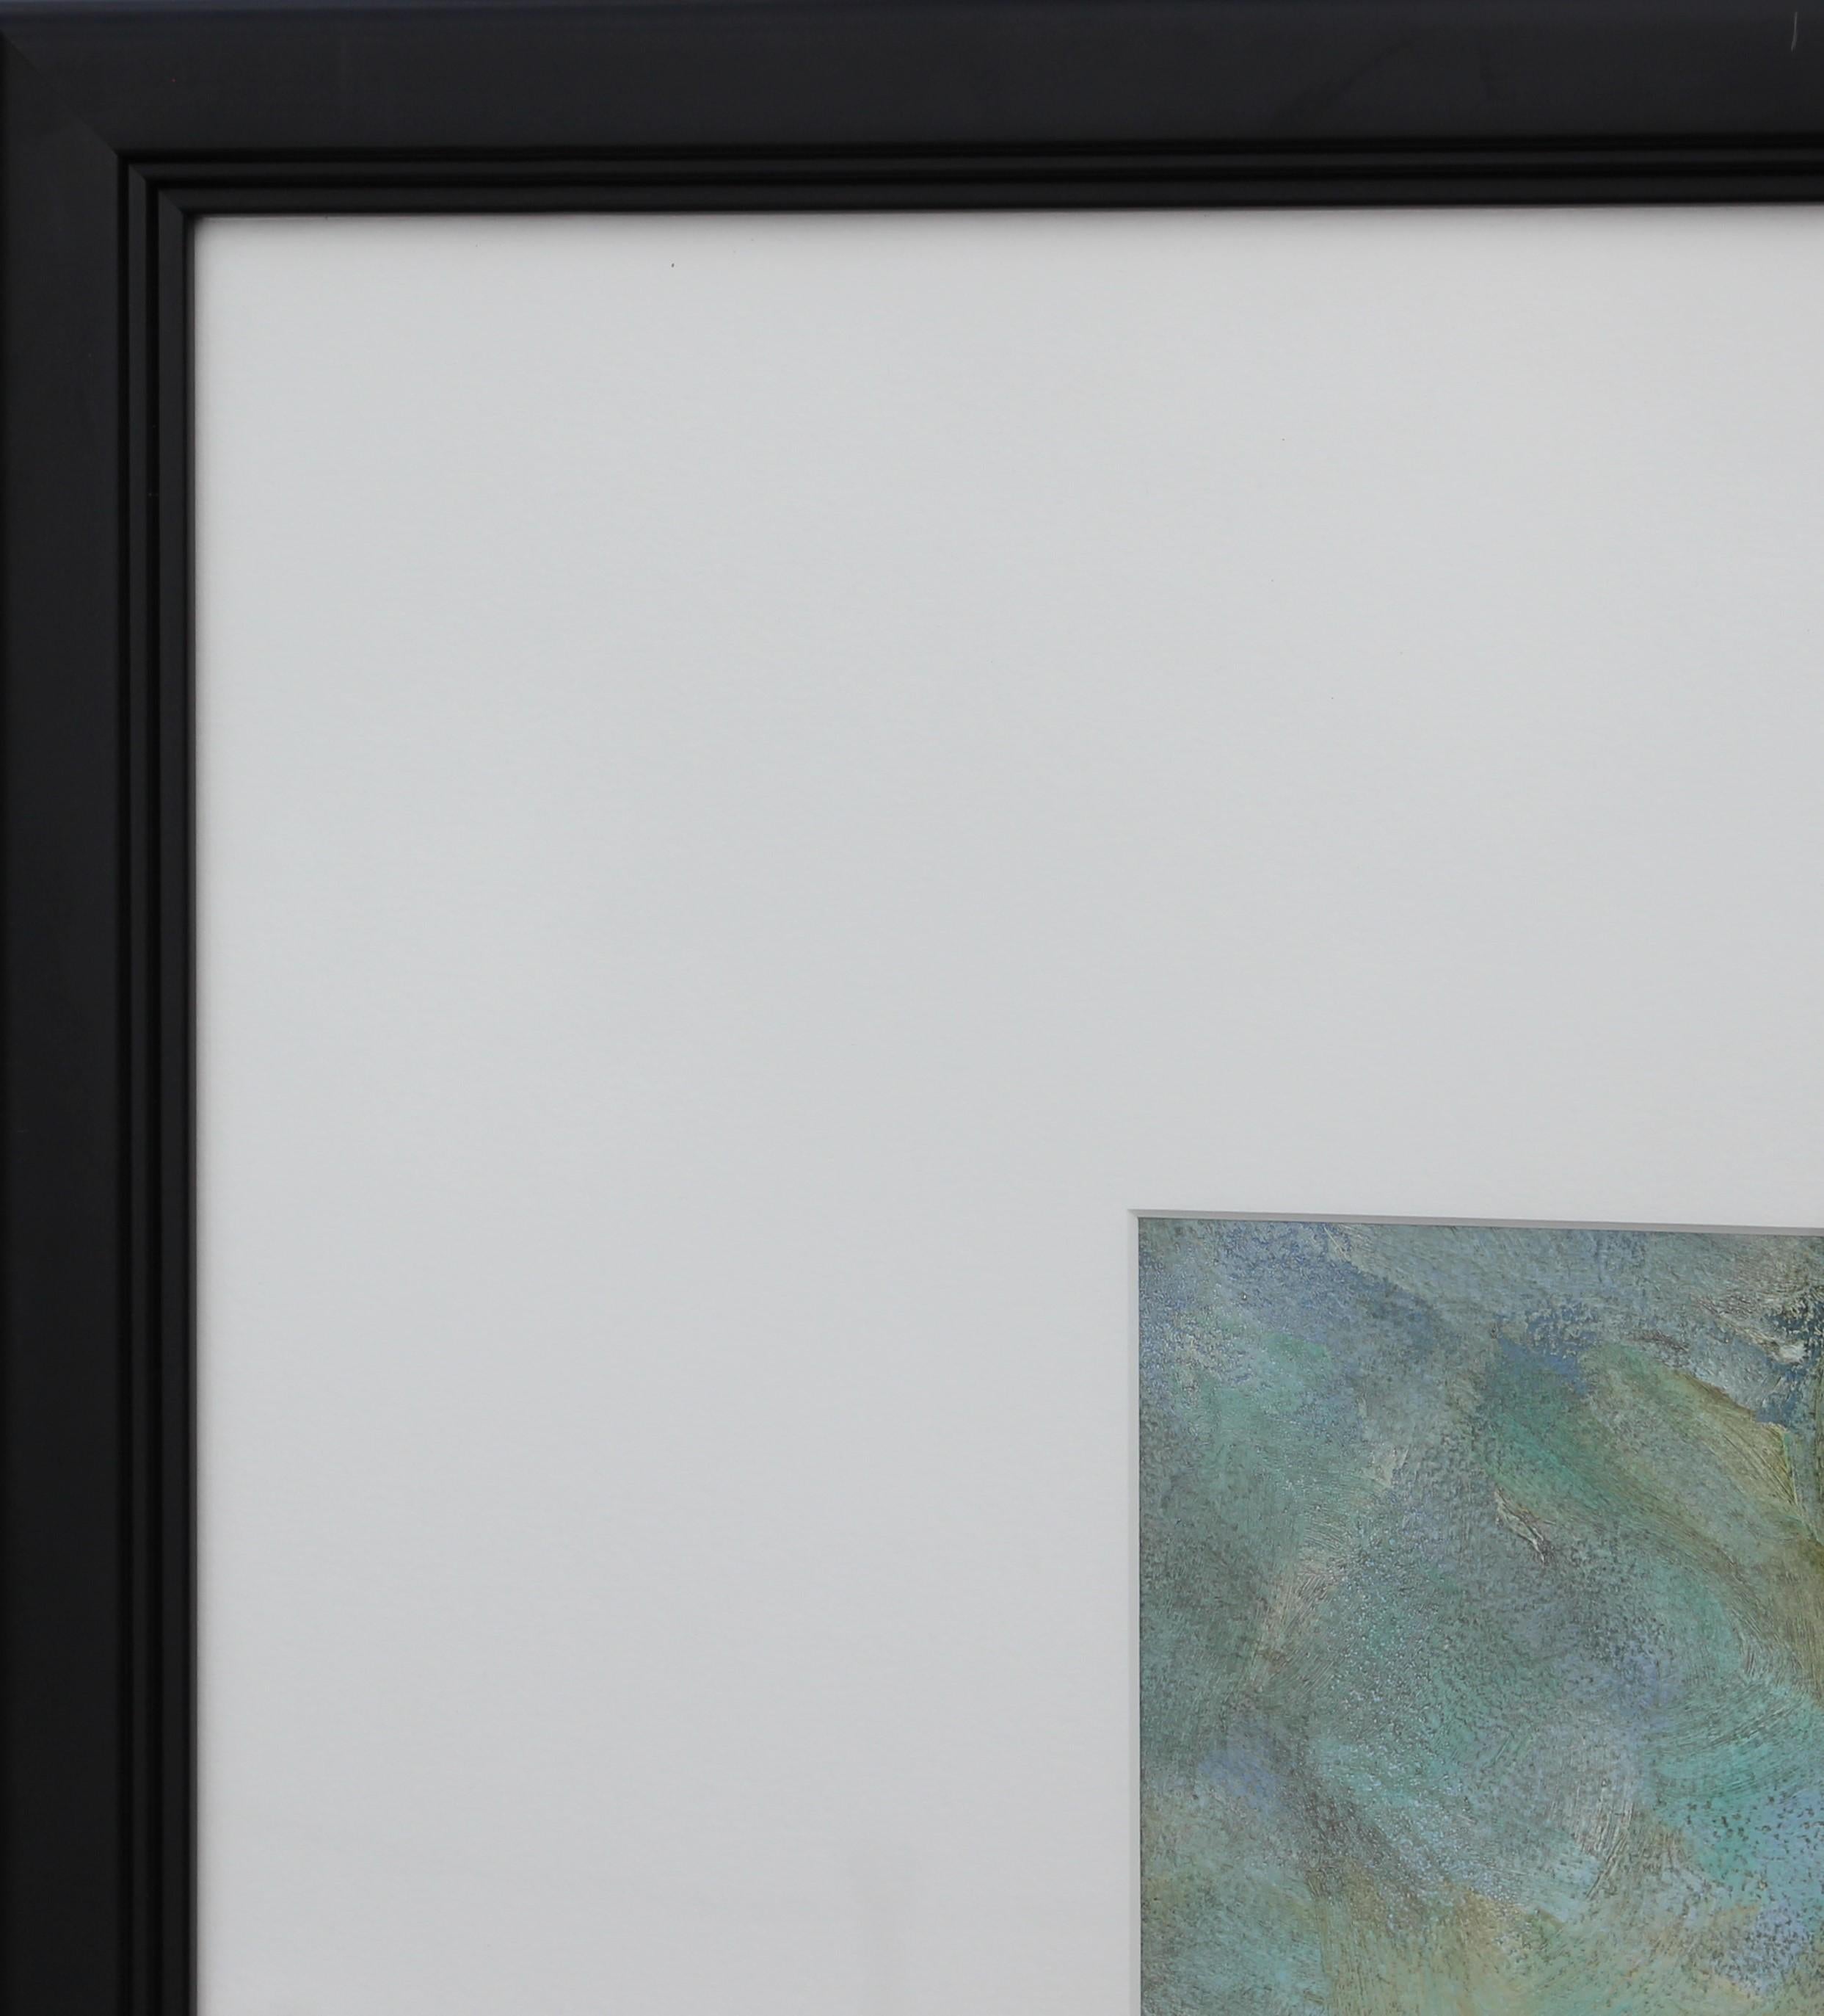 Contemporary abstract colorful painting of a beautiful mountainous landscape. Signed by the artist in the bottom right corner and currently displayed in a black frame with a white matte.

Dimensions Without Frame: H 14.5 in. x W 14.5 in. 

Artist